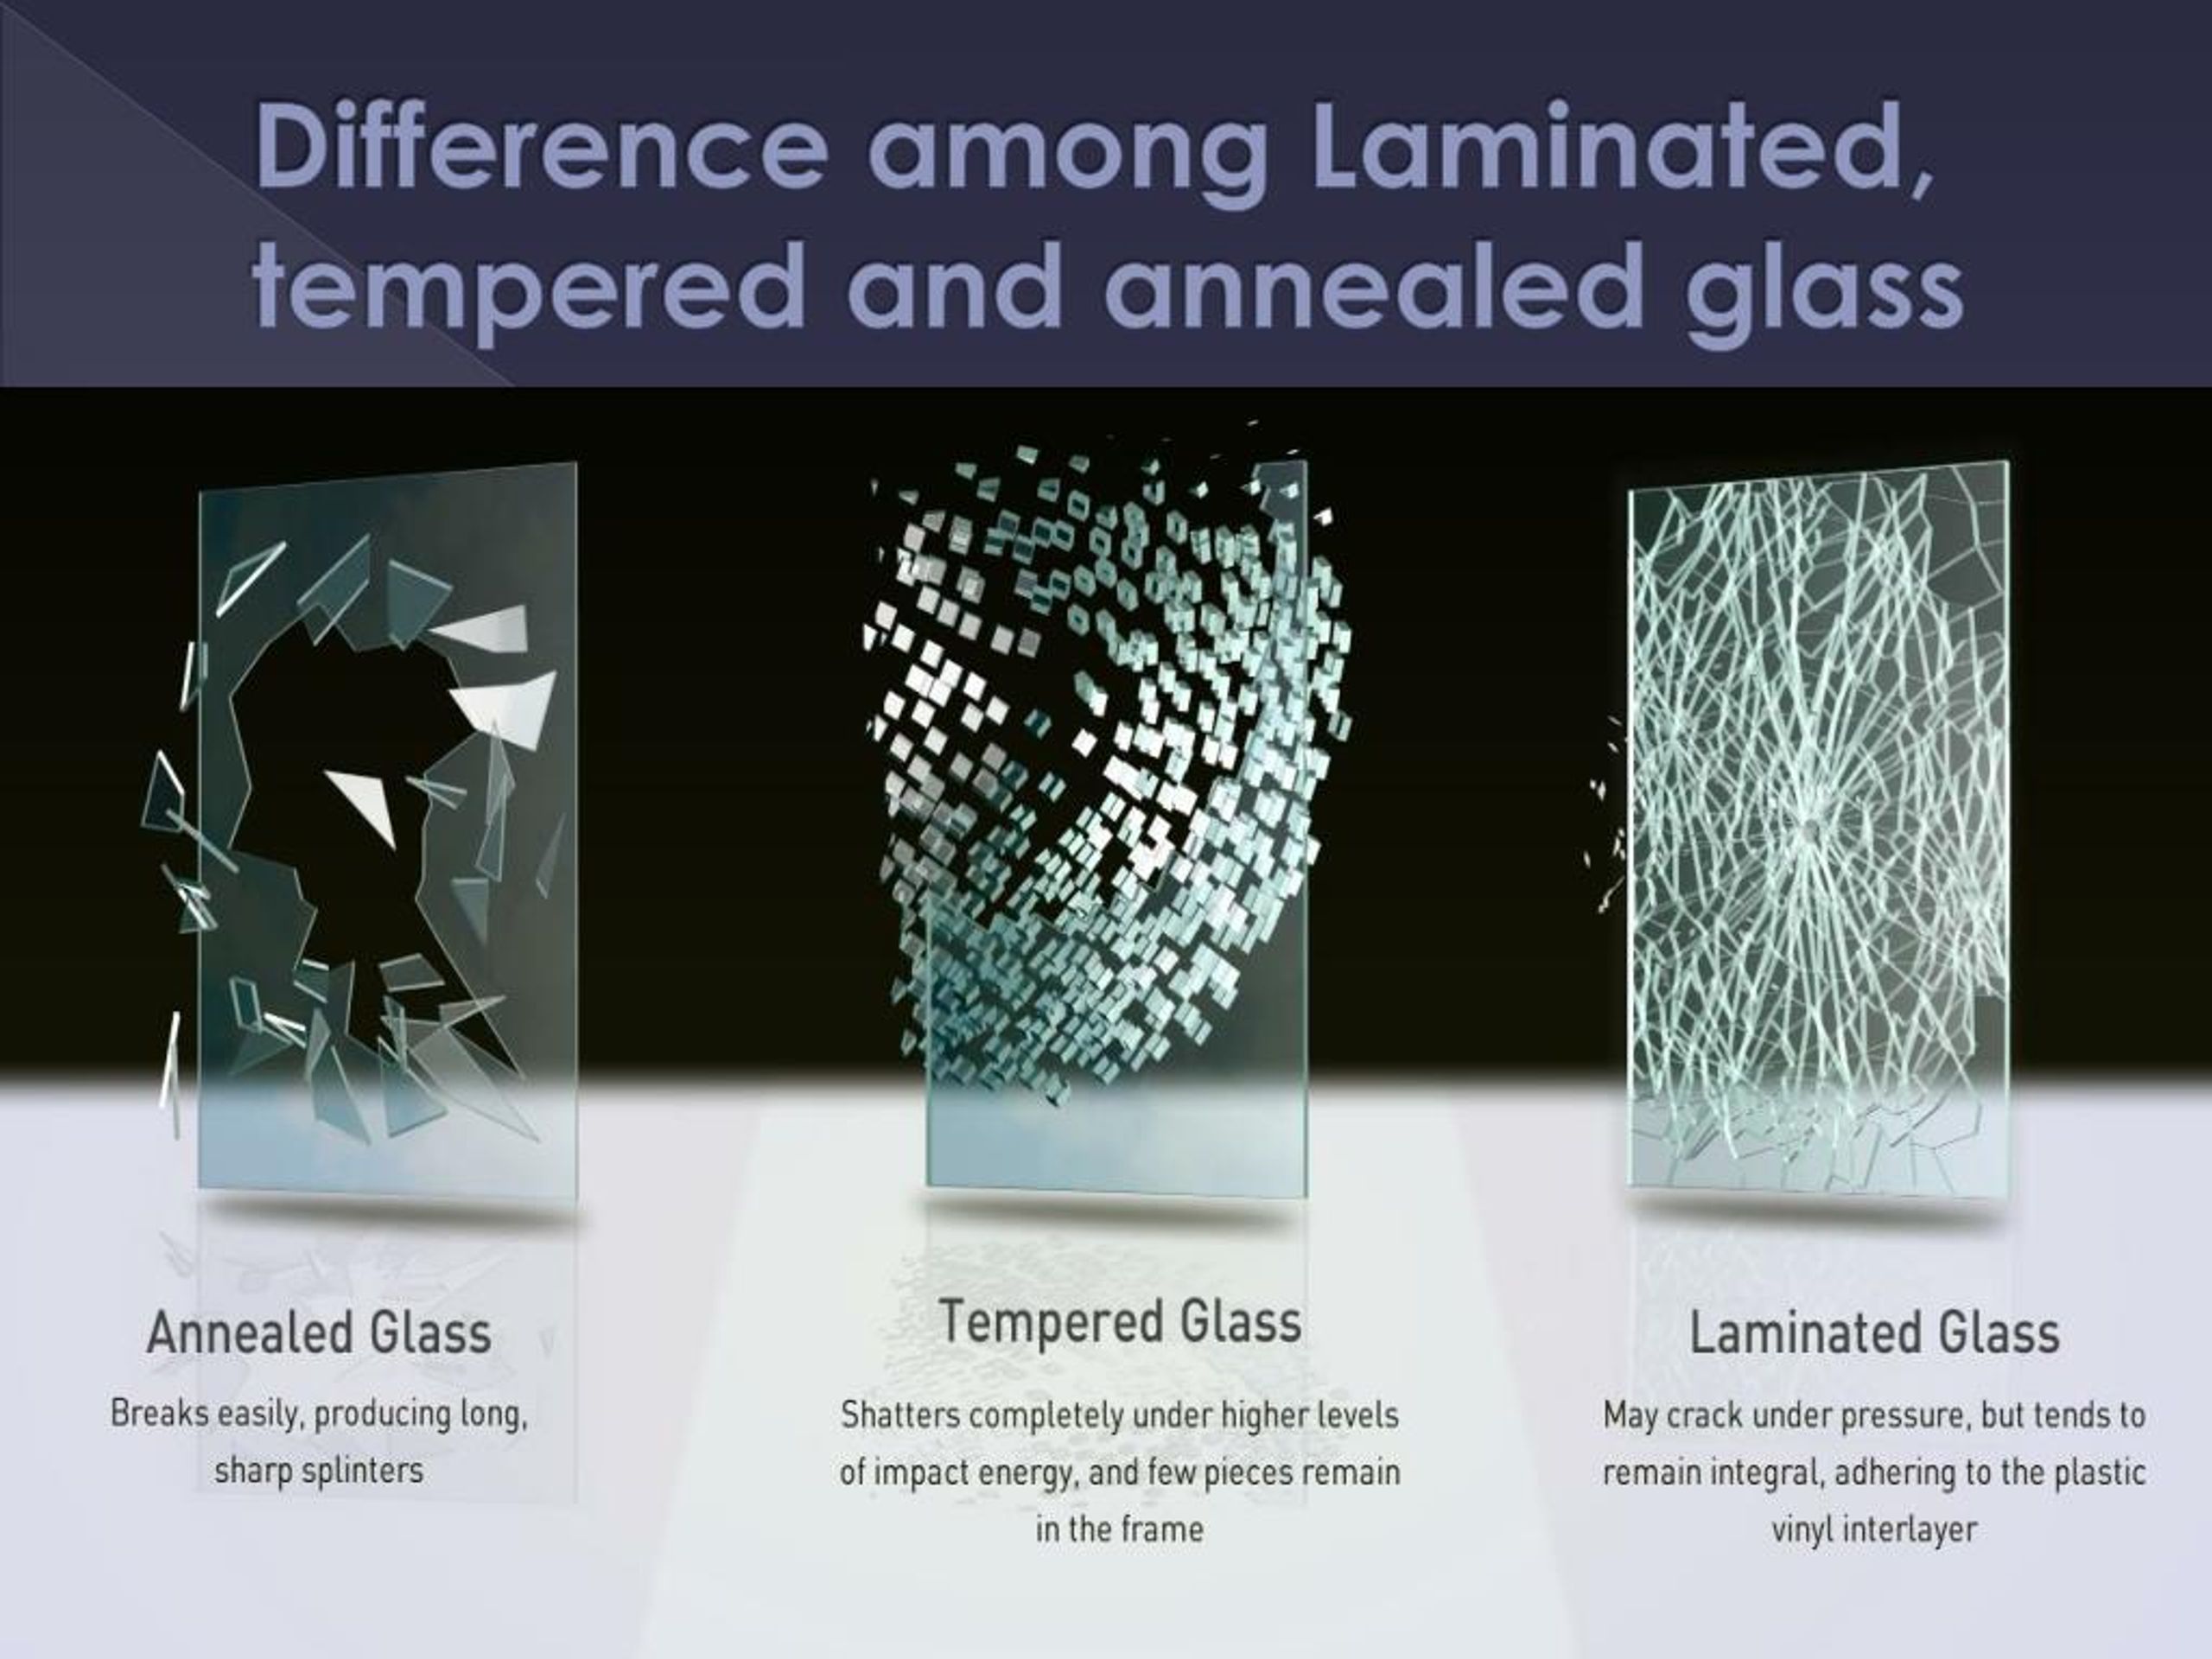 https://image4.slideserve.com/7728235/difference-among-laminated-tempered-and-annealed-glass-l.jpg